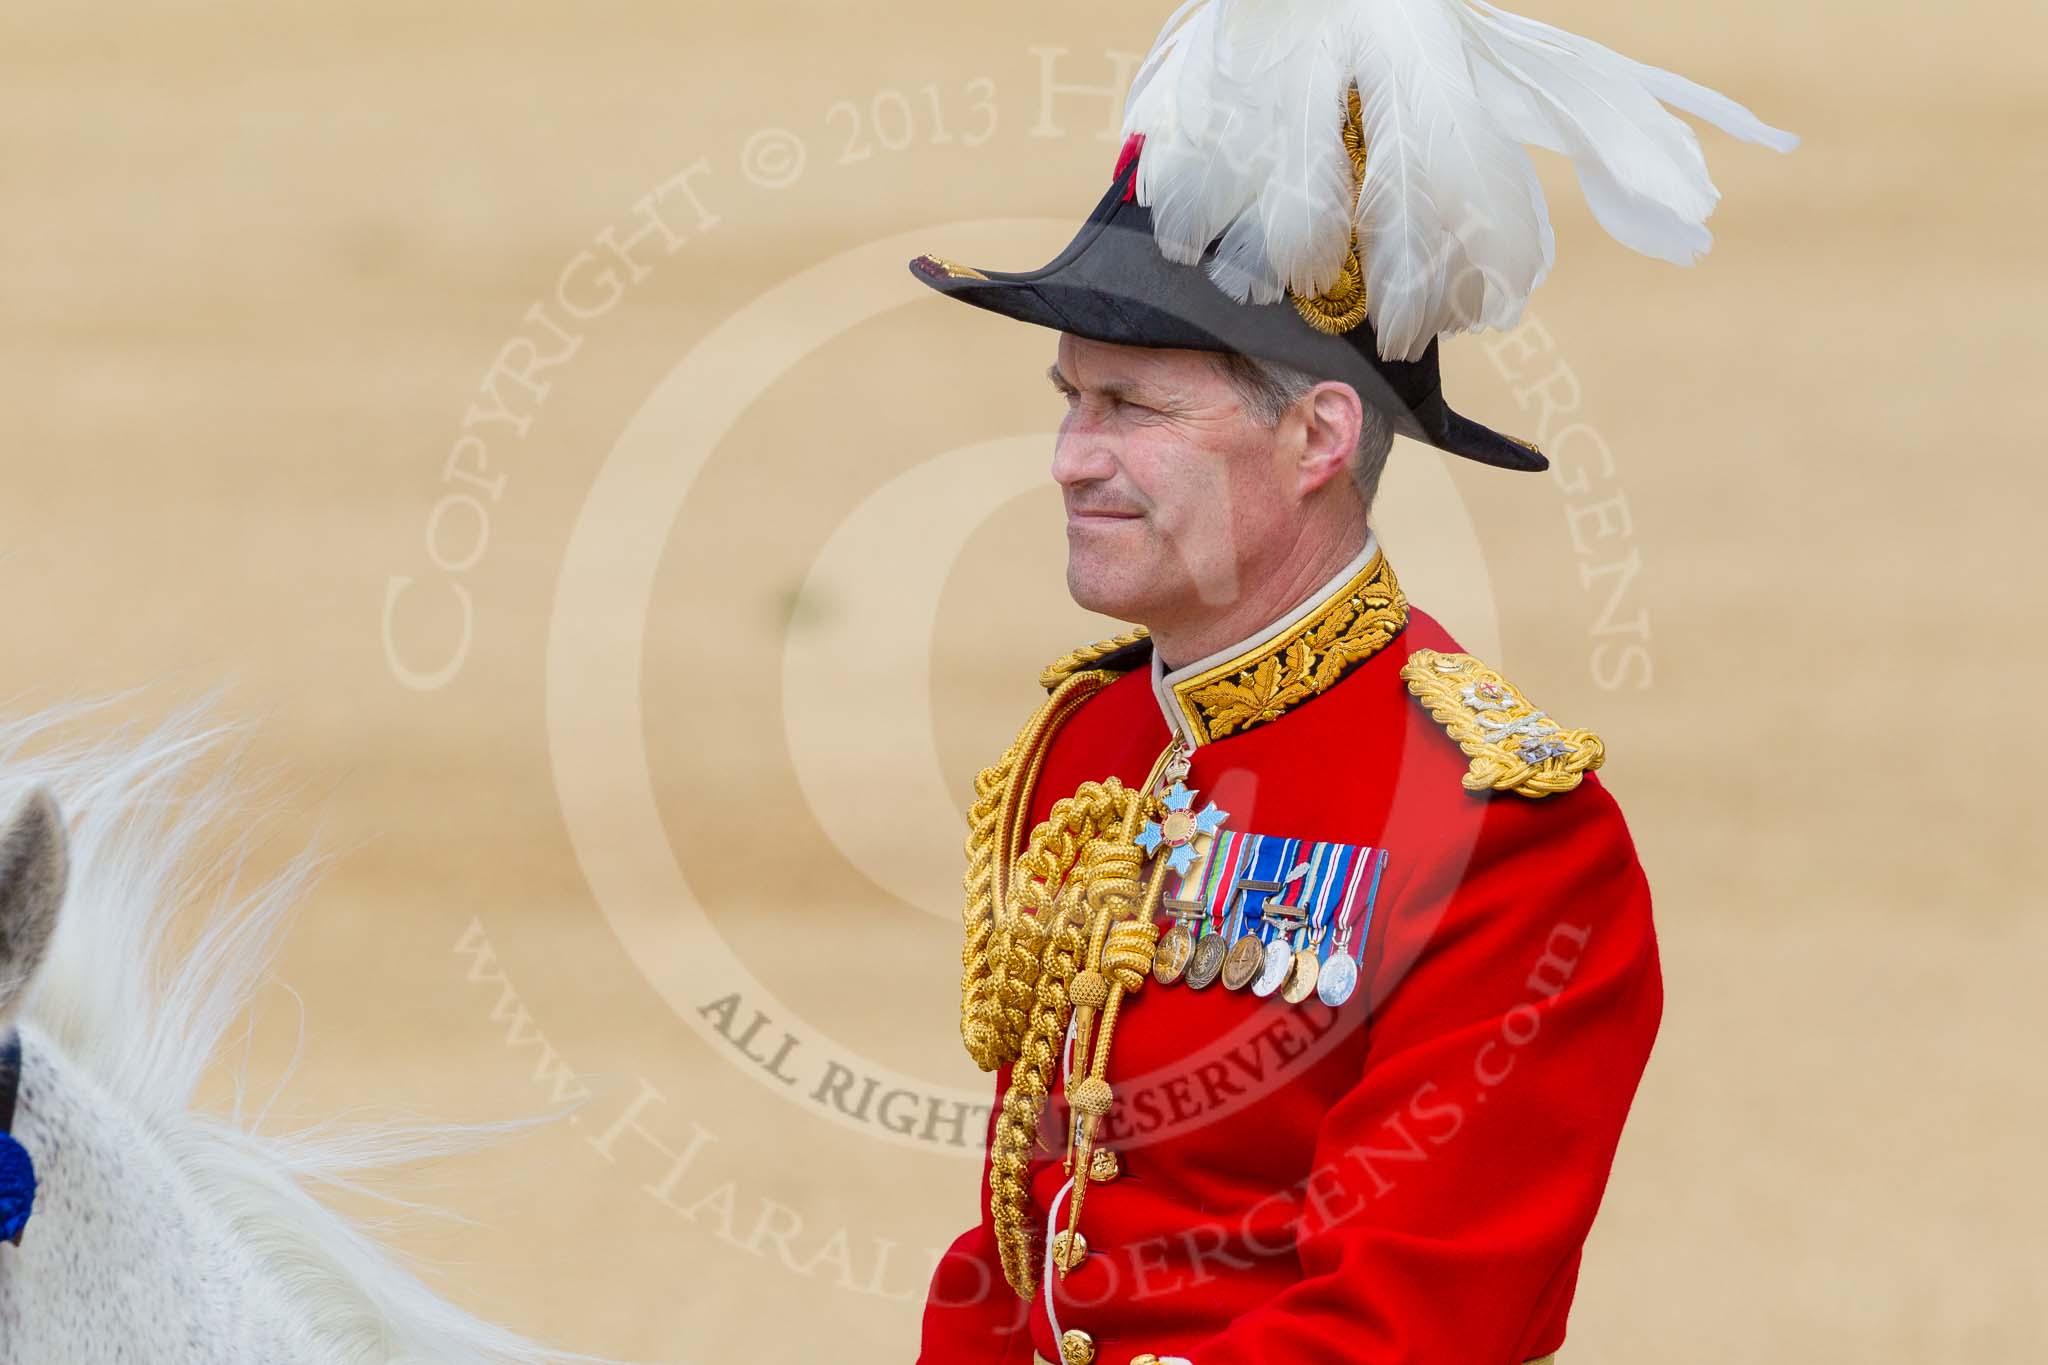 The Colonel's Review 2015.
Horse Guards Parade, Westminster,
London,

United Kingdom,
on 06 June 2015 at 11:01, image #201